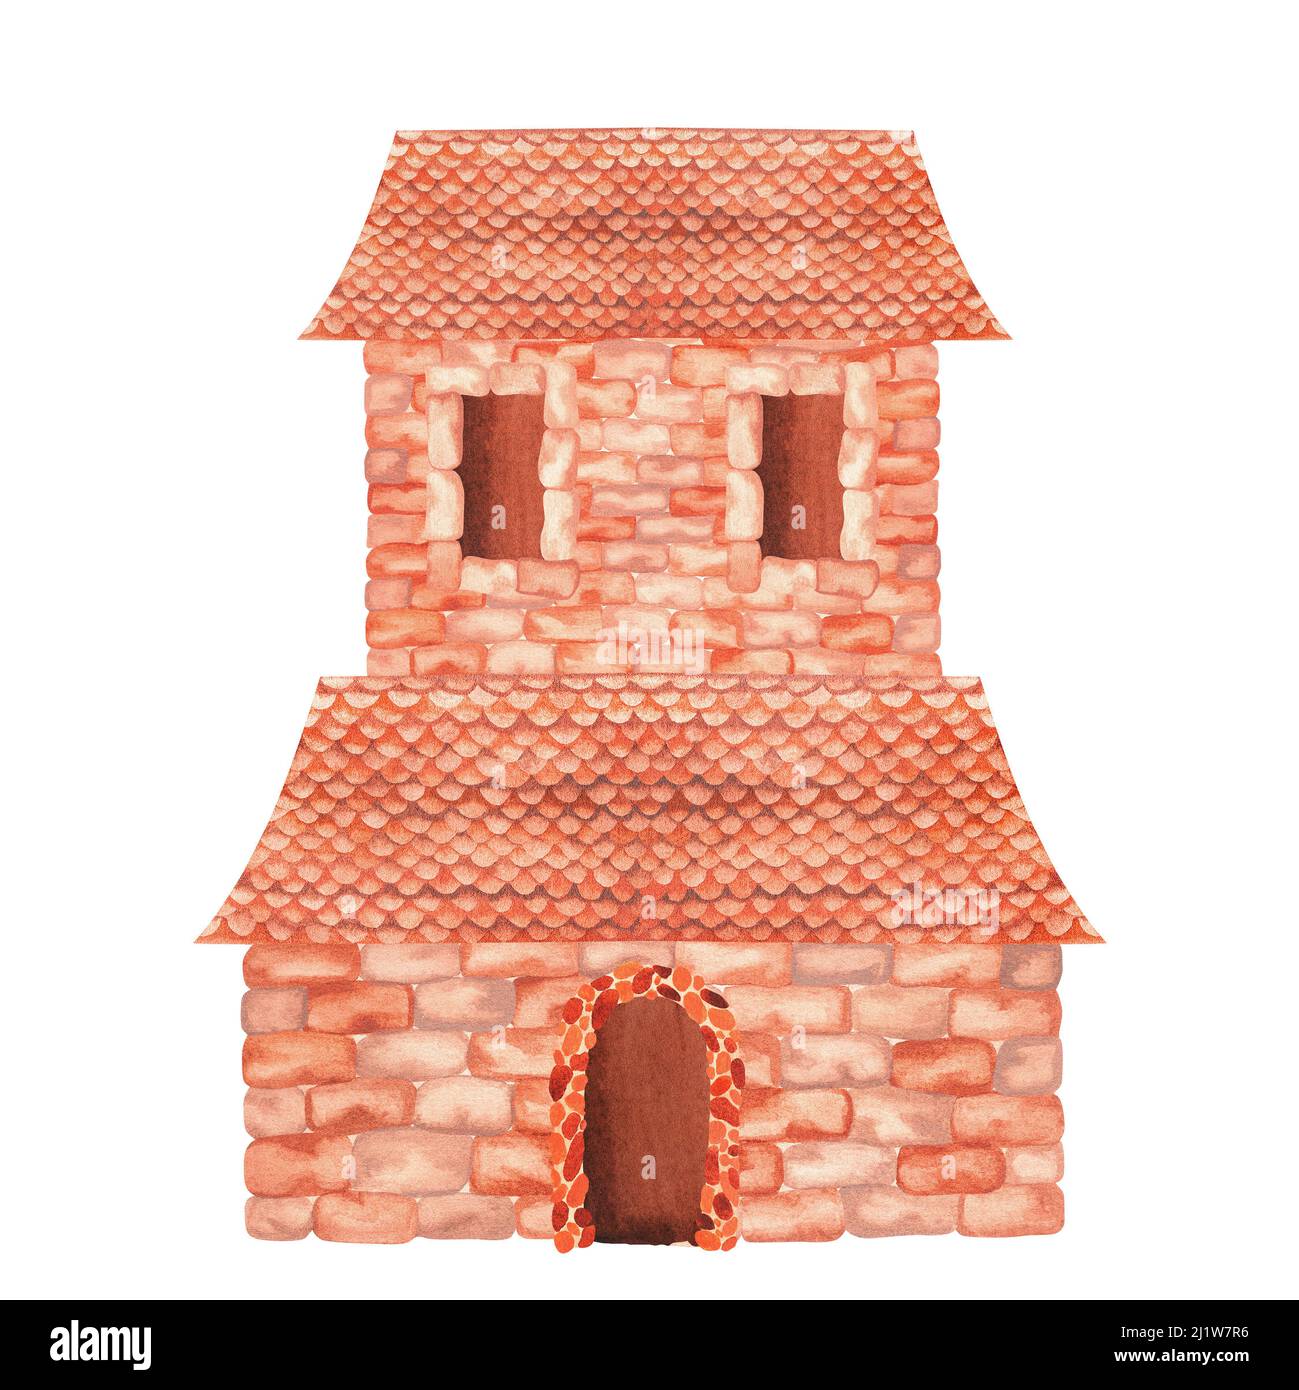 Brick castle. Watercolor illustration. Isolated on a white background. For your design of children's clothing, nursery interior items, stationery Stock Photo